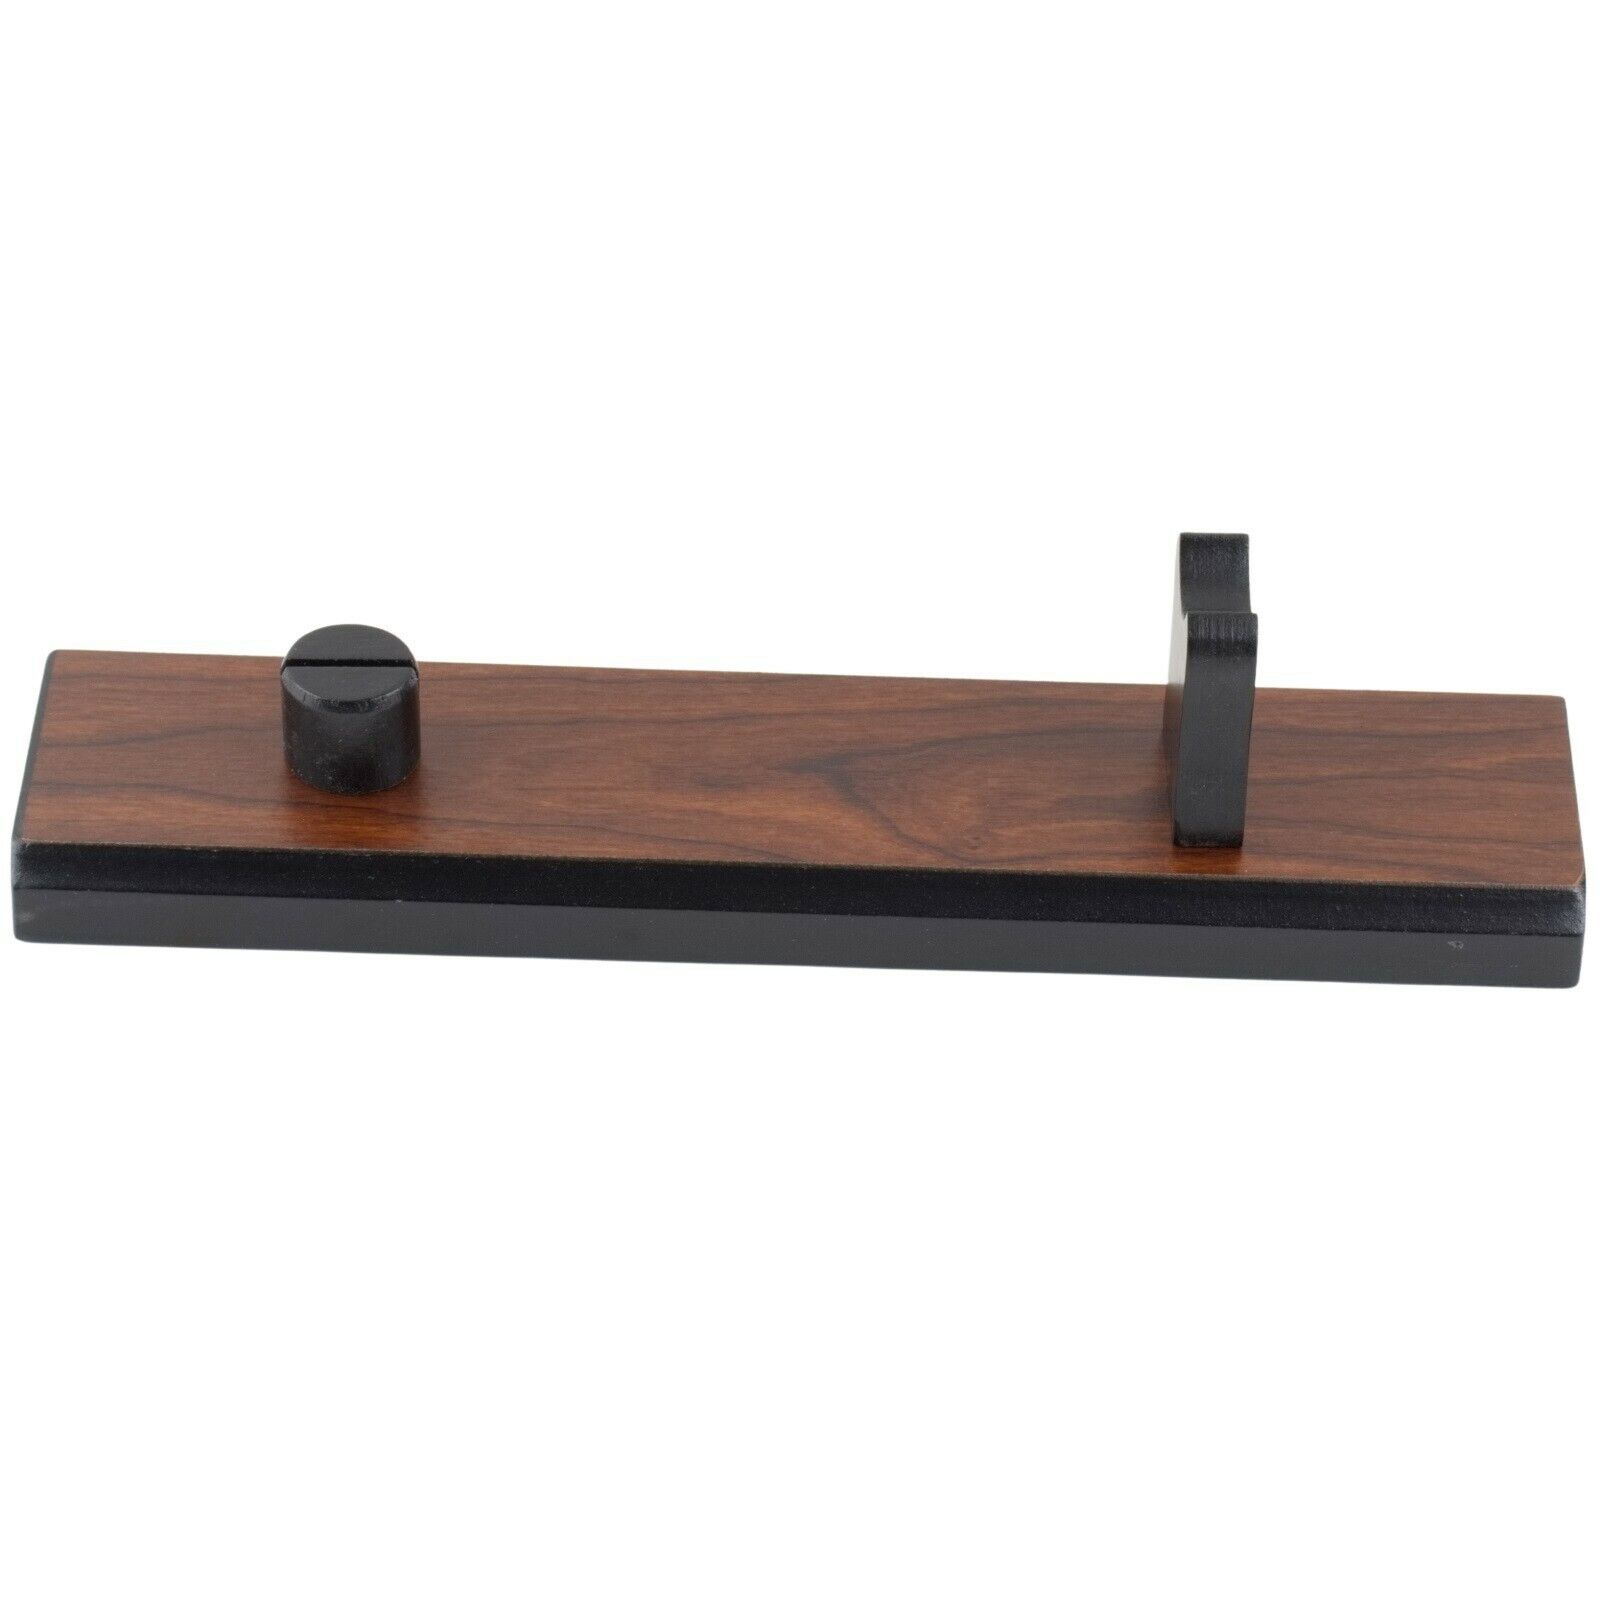 Fixed Knife Display Stand Black Brown Wood 10.5\